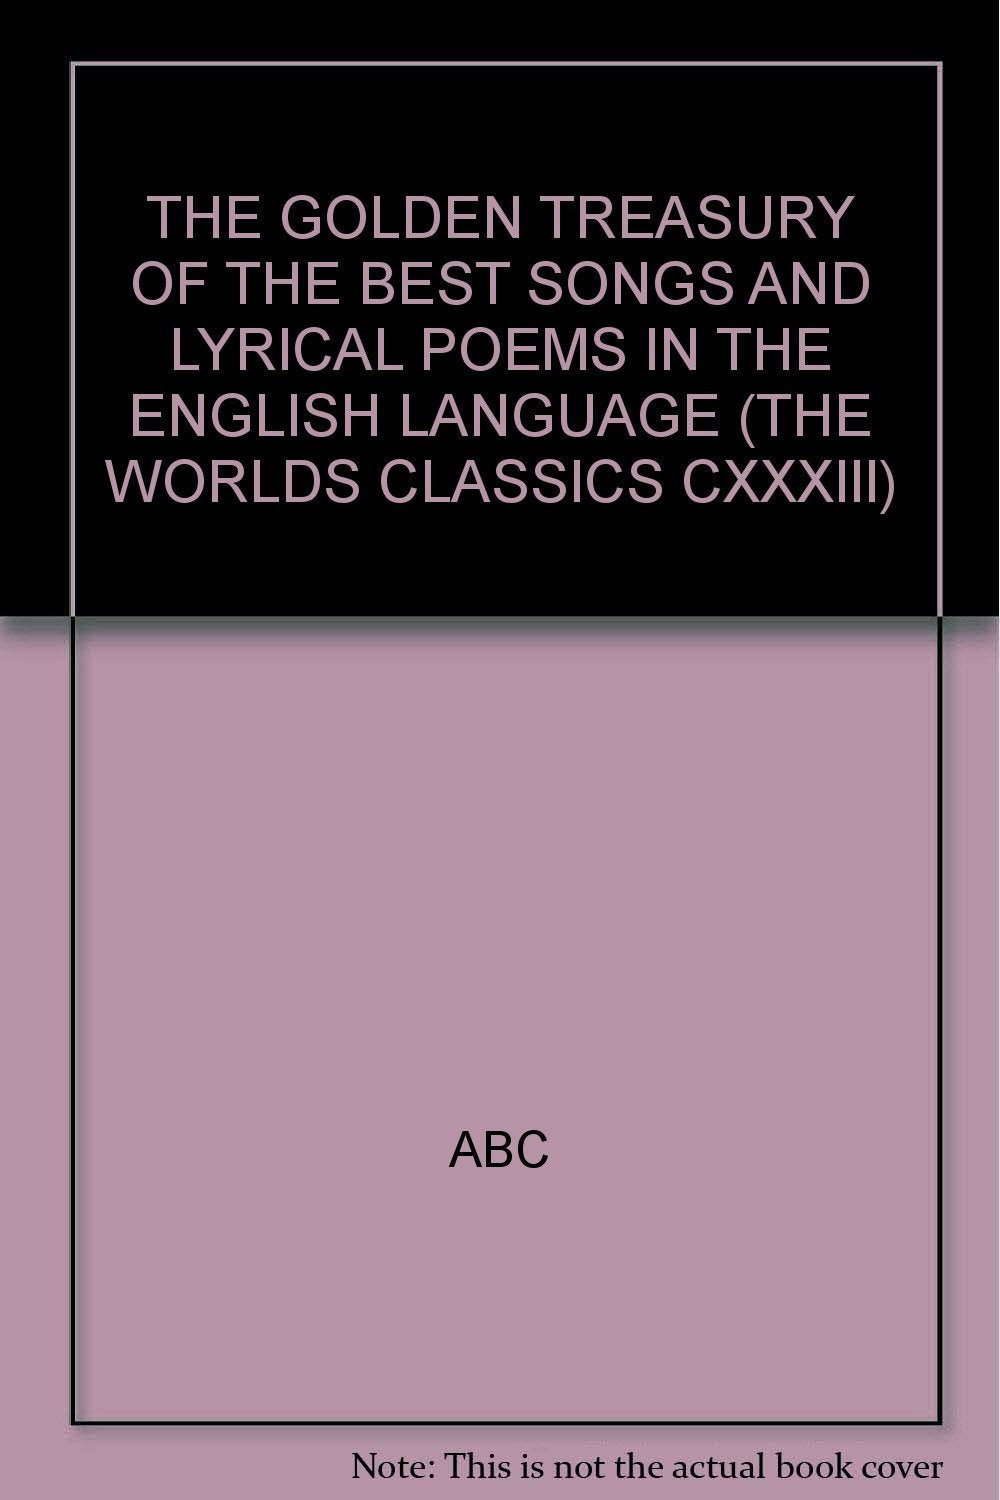 THE GOLDEN TREASURY OF THE BEST SONGS AND LYRICAL POEMS IN THE ENGLISH LANGUAGE (THE WORLDS CLASSICS CXXXIII) [Unknown Binding]